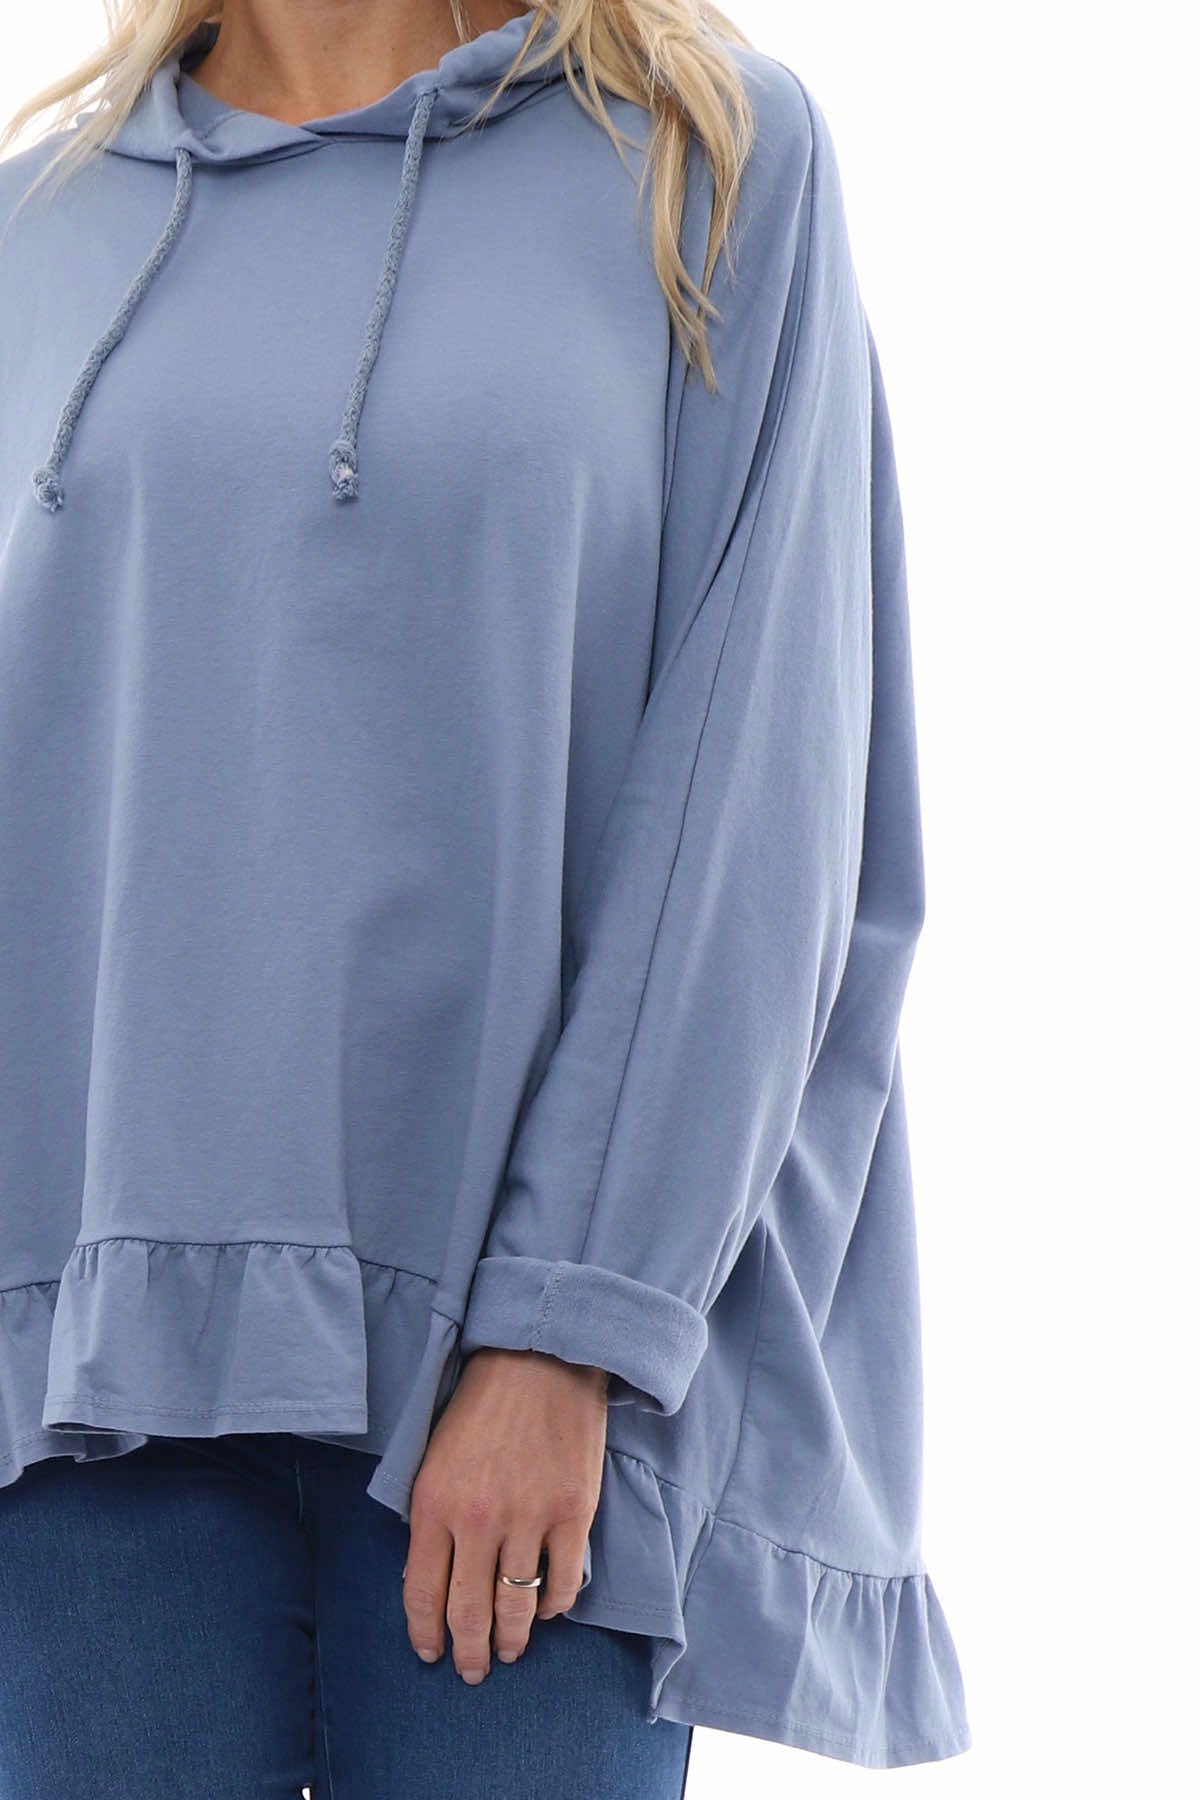 Jeyda Hooded Frill Cotton Top Blue